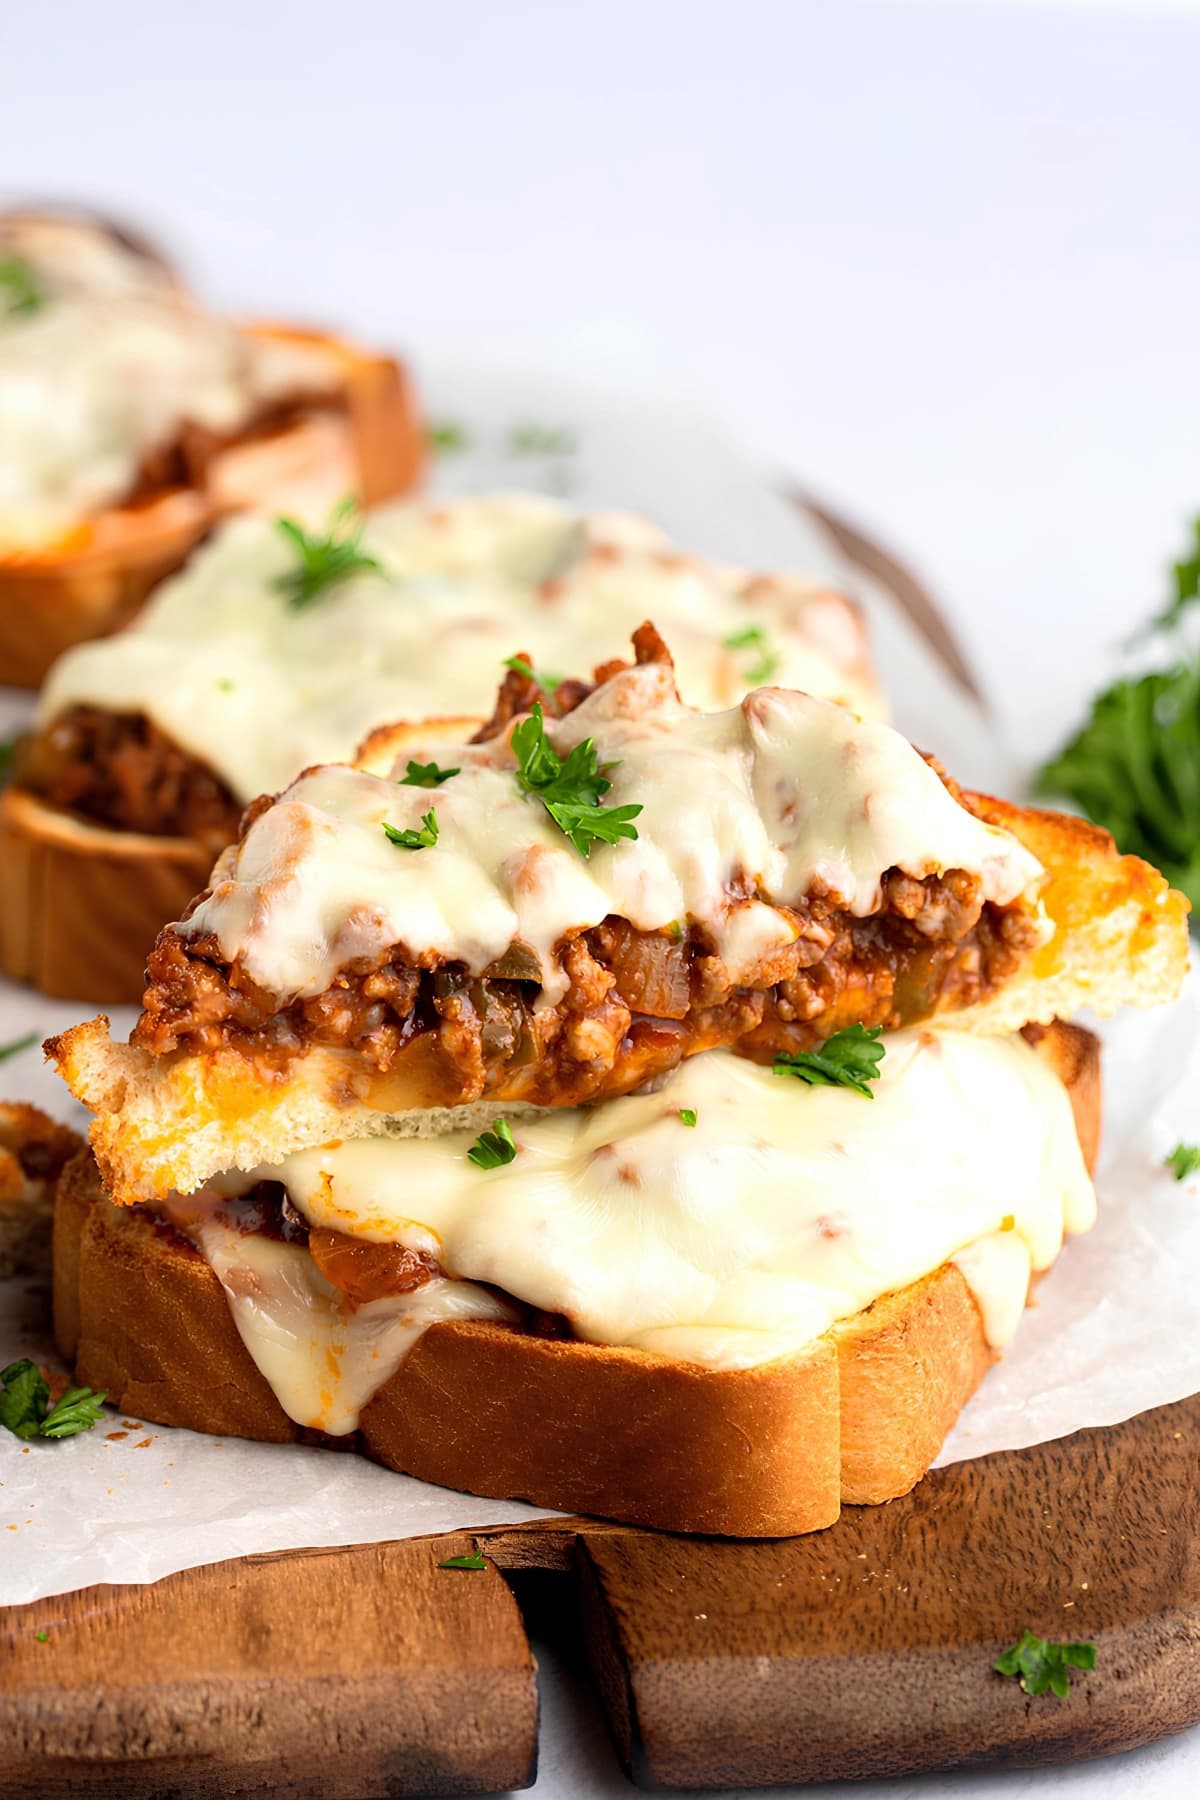 Homemade Texas Toast Sloppy Joes with Ground Beef and Creamy Sauce